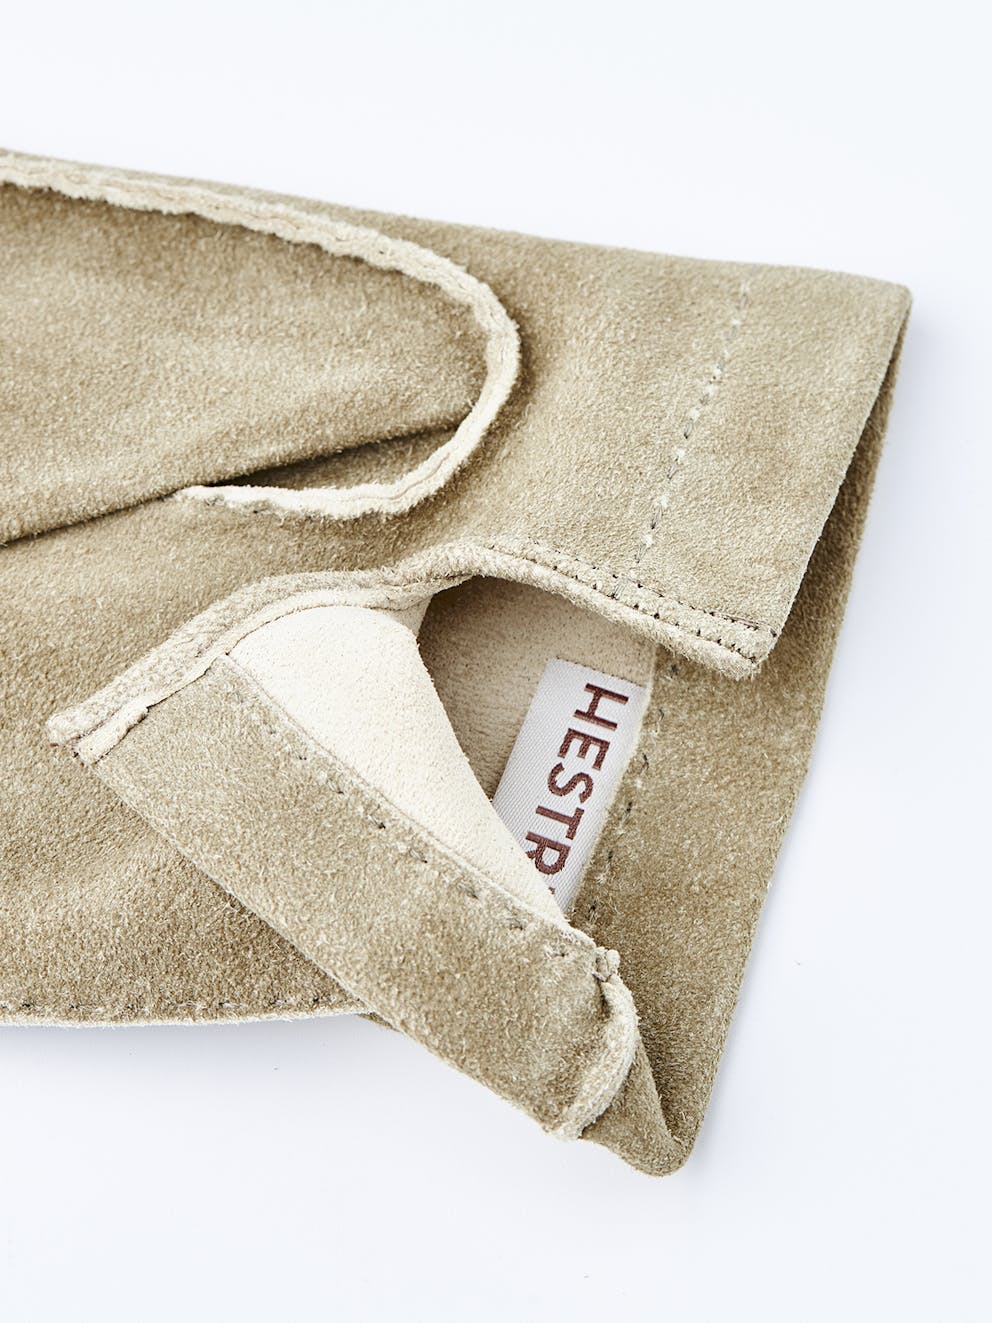 Hestra Sand Handsewn | Unlined Chamois Gloves -